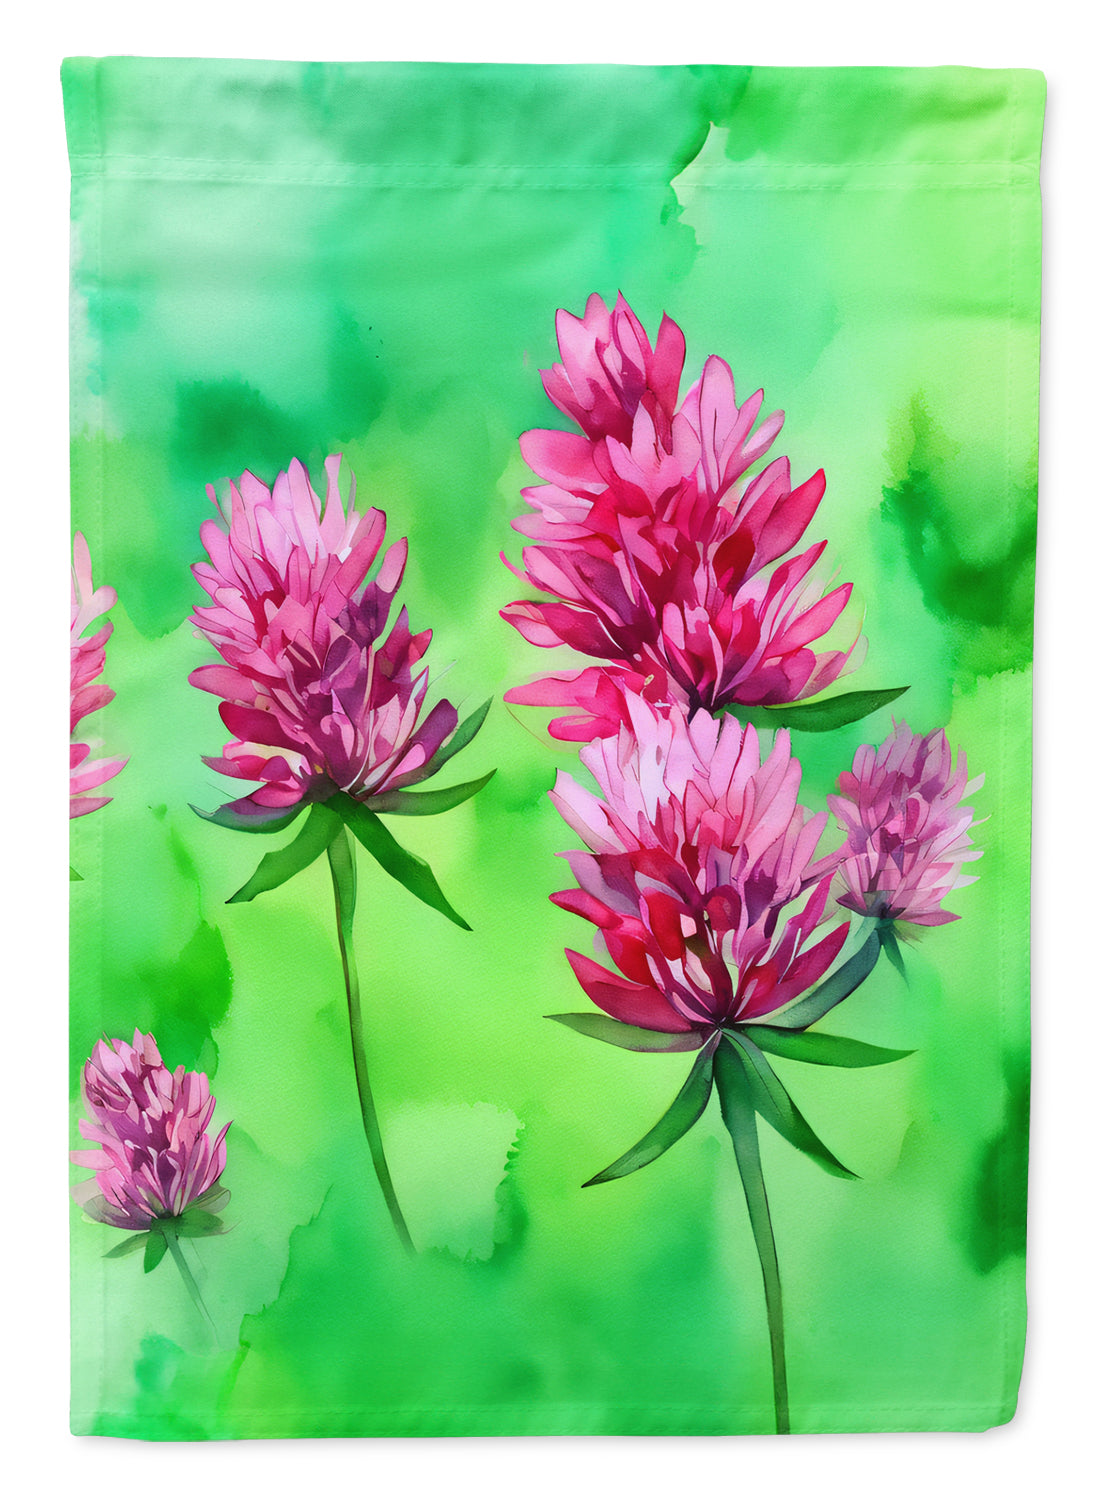 Buy this Vermont Red Clover in Watercolor Garden Flag